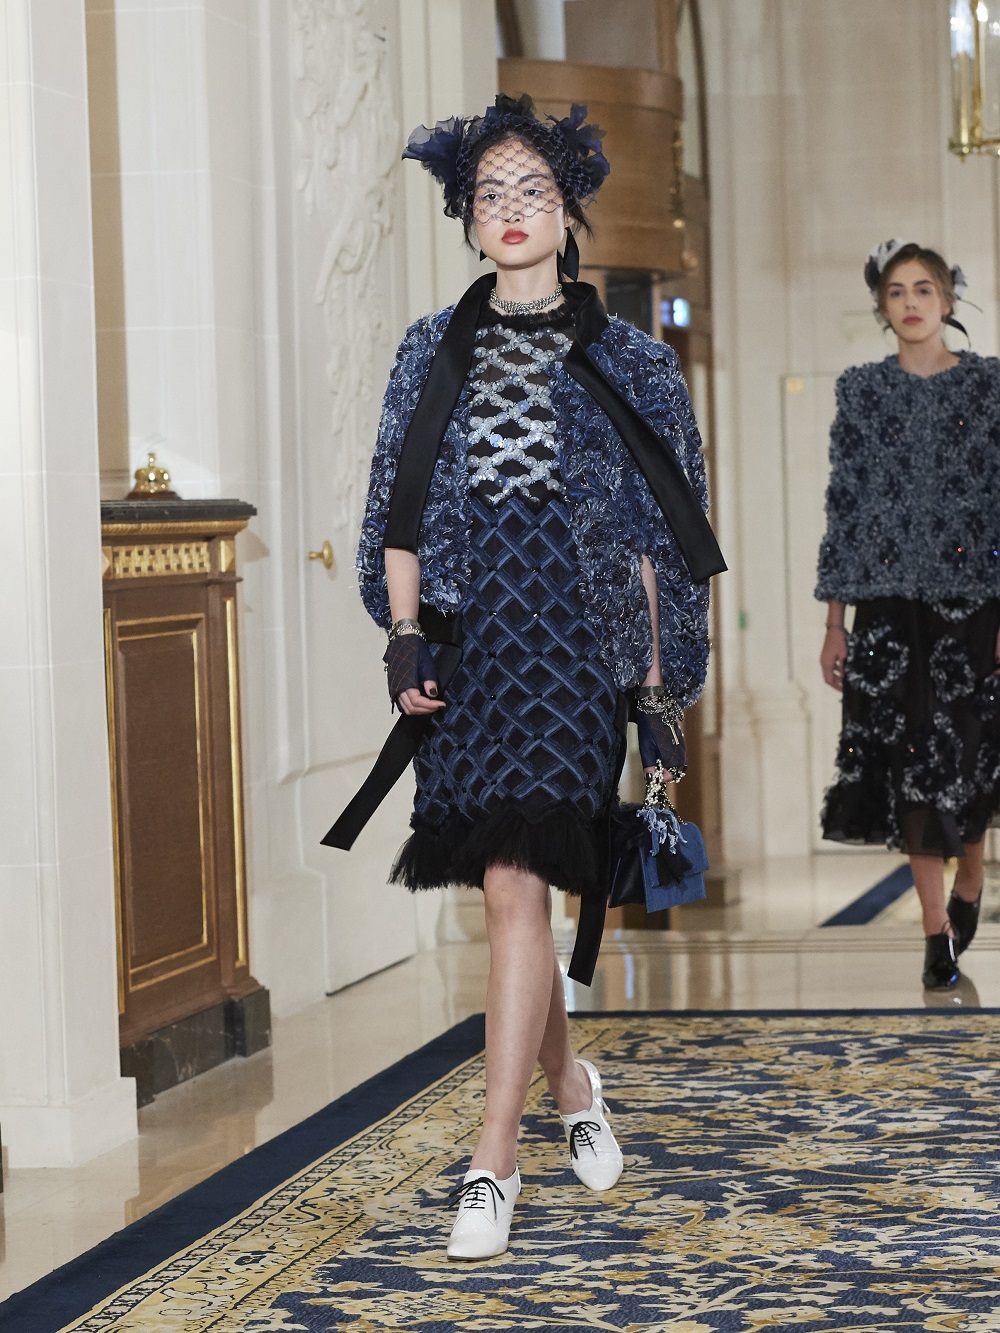 A model wears a two piece skirt suit on the runway at Chanel's pre-fall 2017 collection at The Ritz